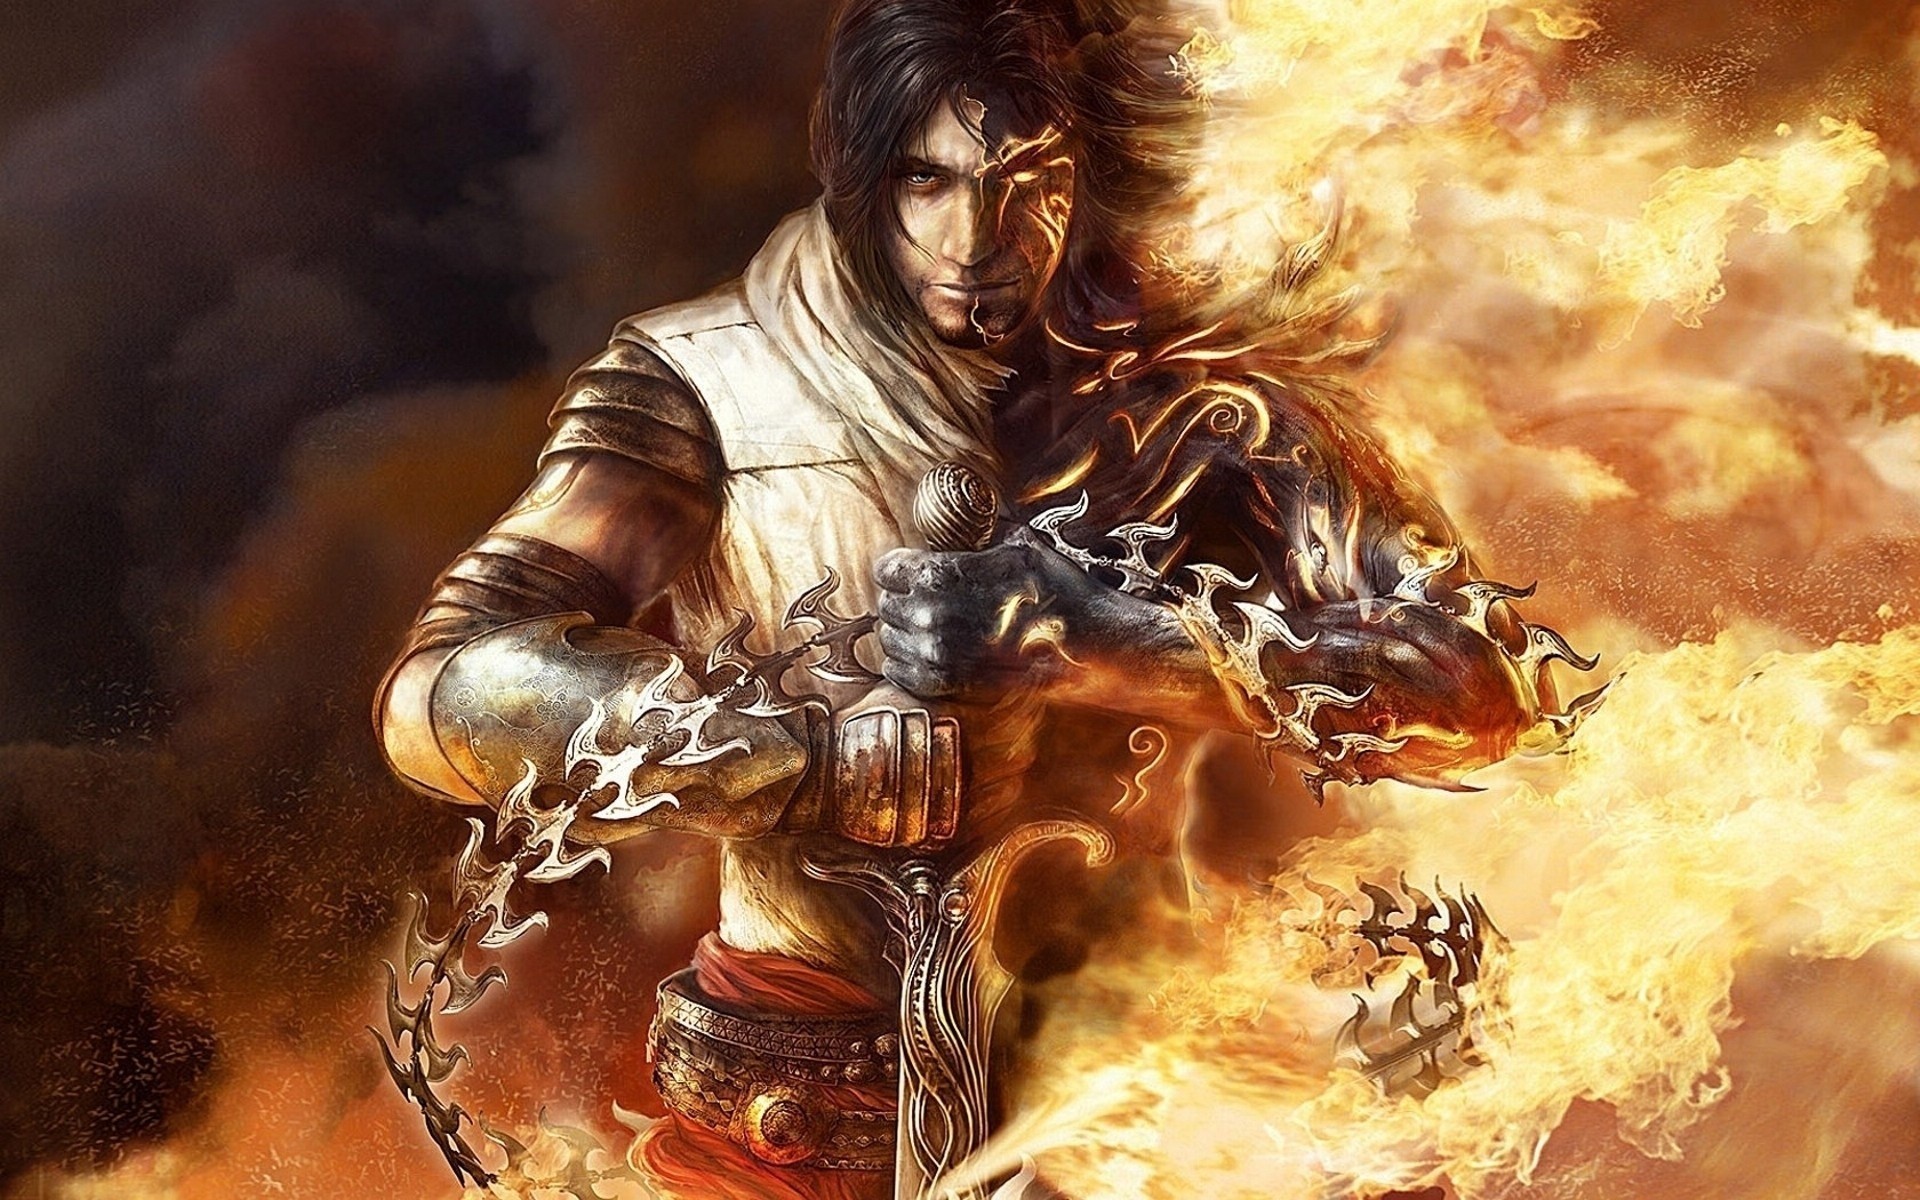 Prince of persia 2008 steam фото 115